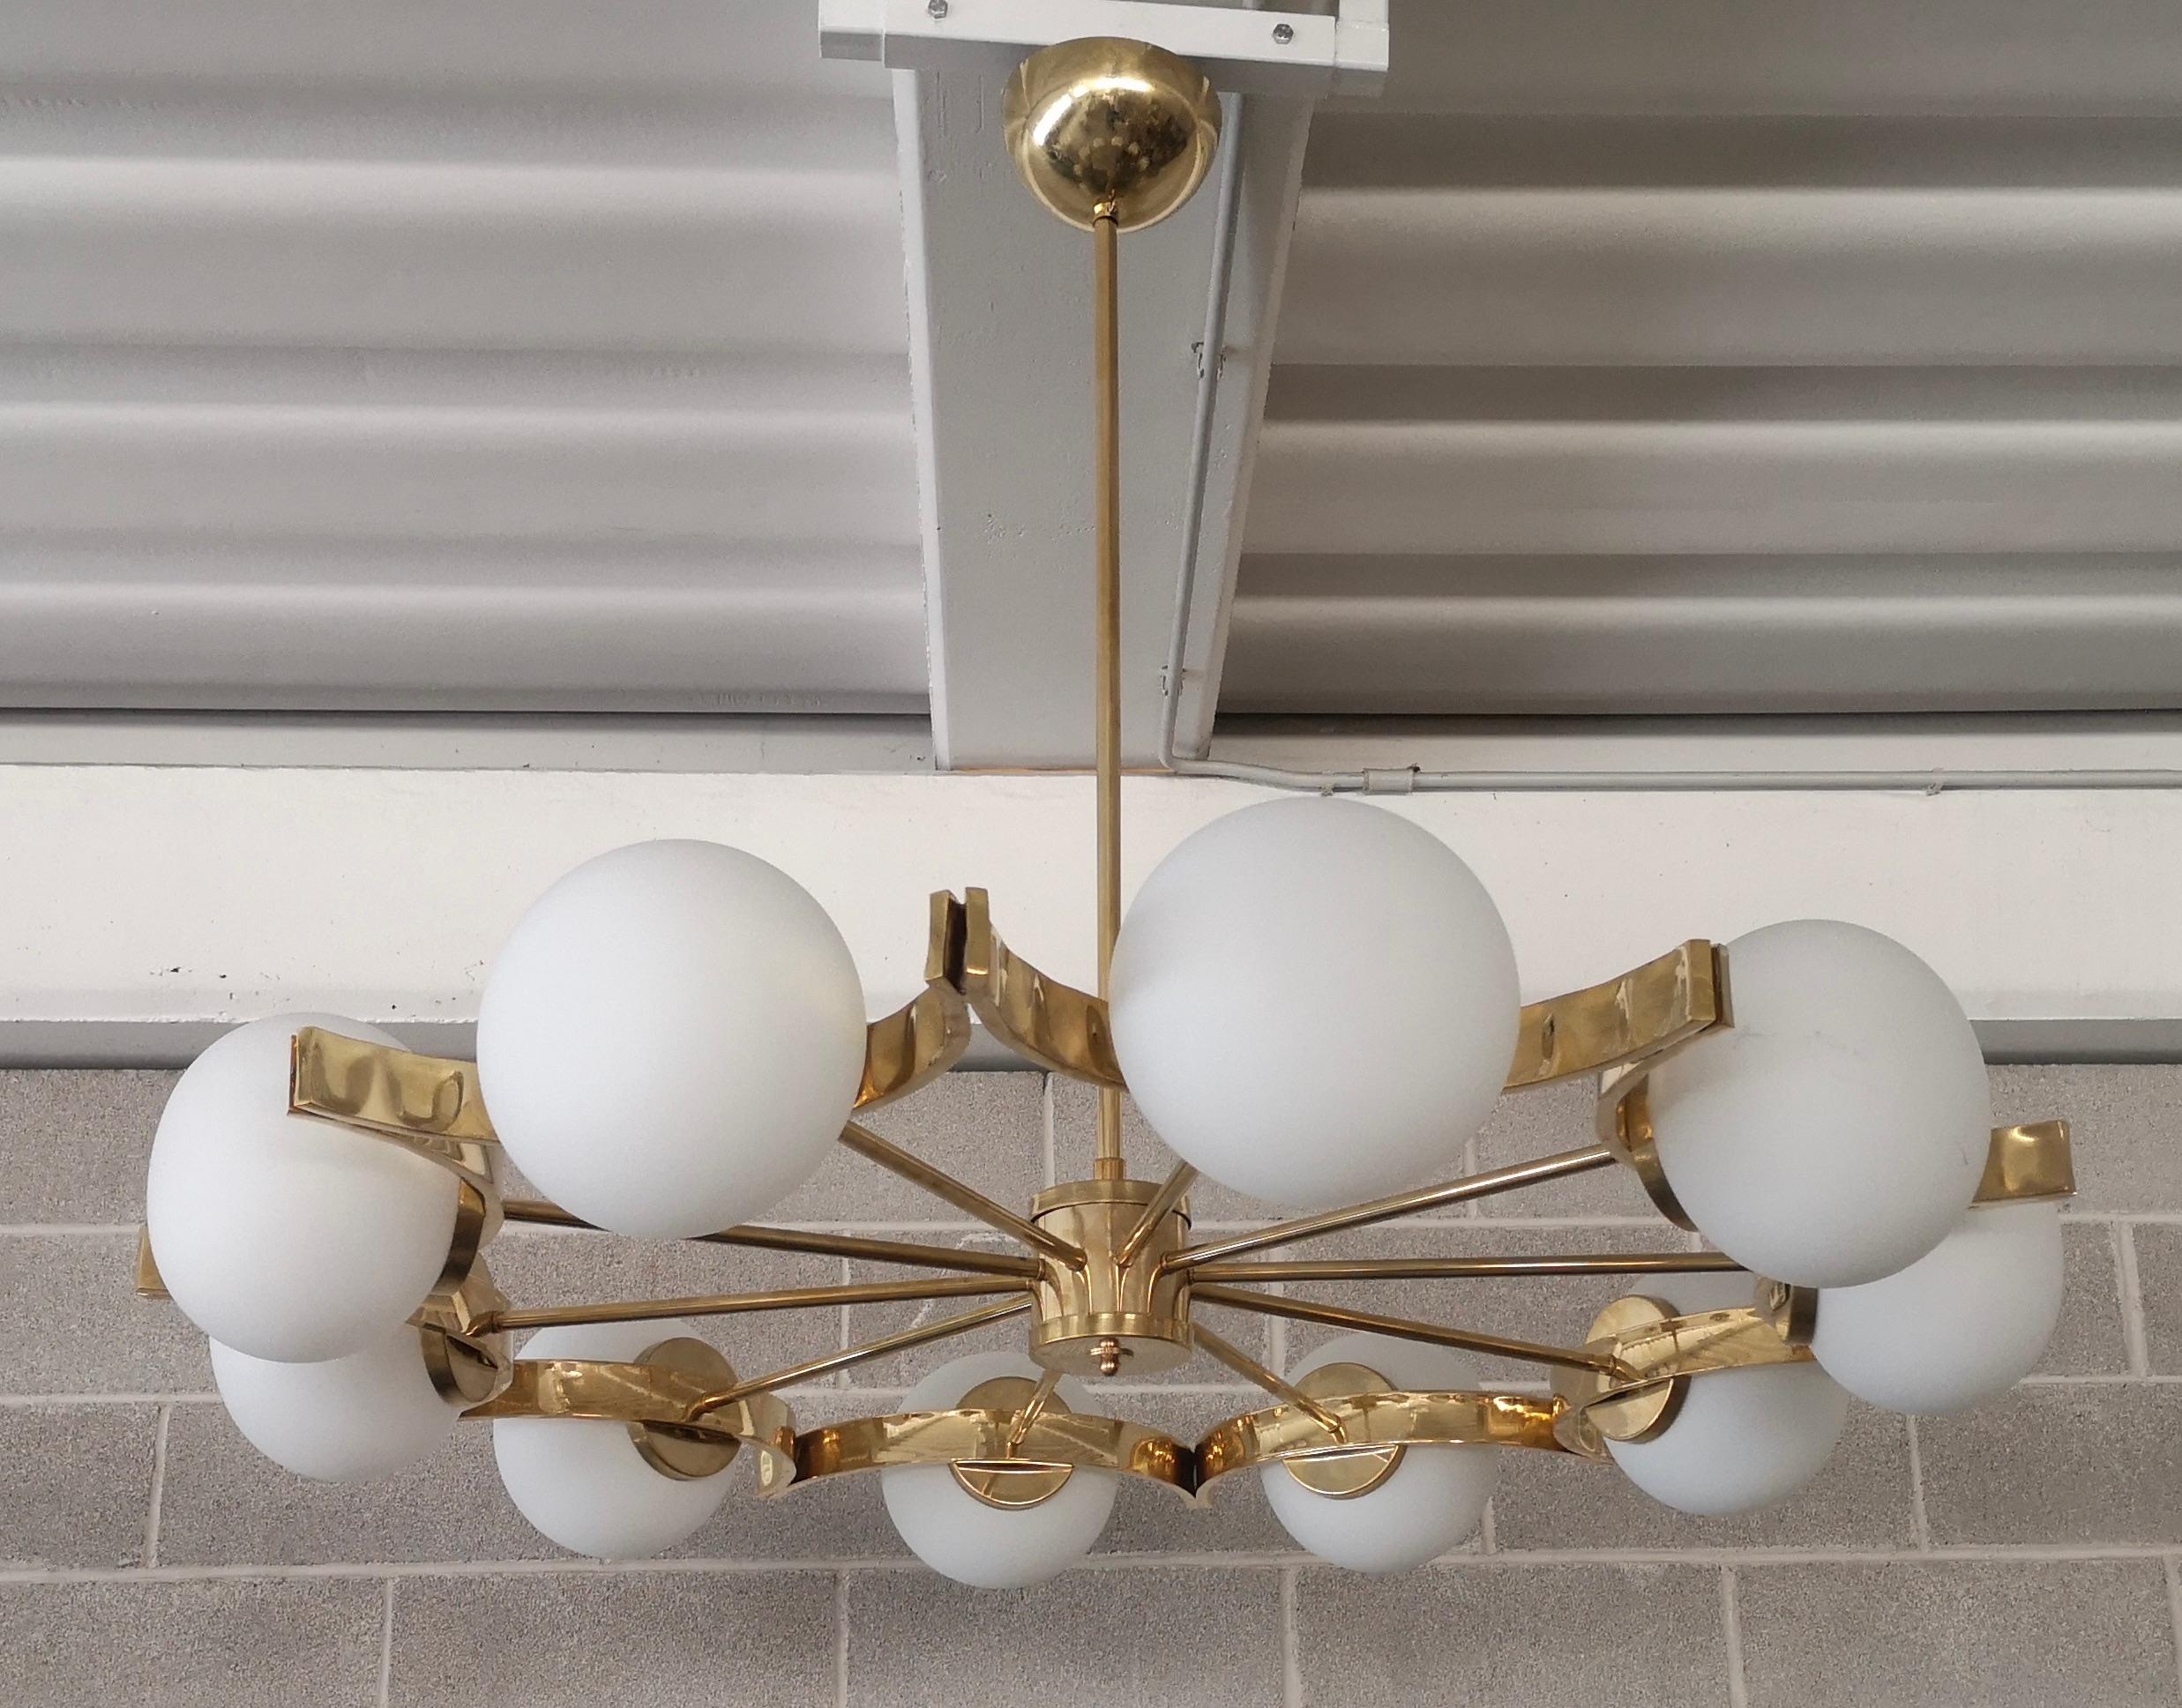 Superb chandelier for its characteristic concave circular structure, unique design for the brass housing of the spheres.

The chandelier has a polished brass structure, it is composed of a series of brass concave circular joined all together. In the